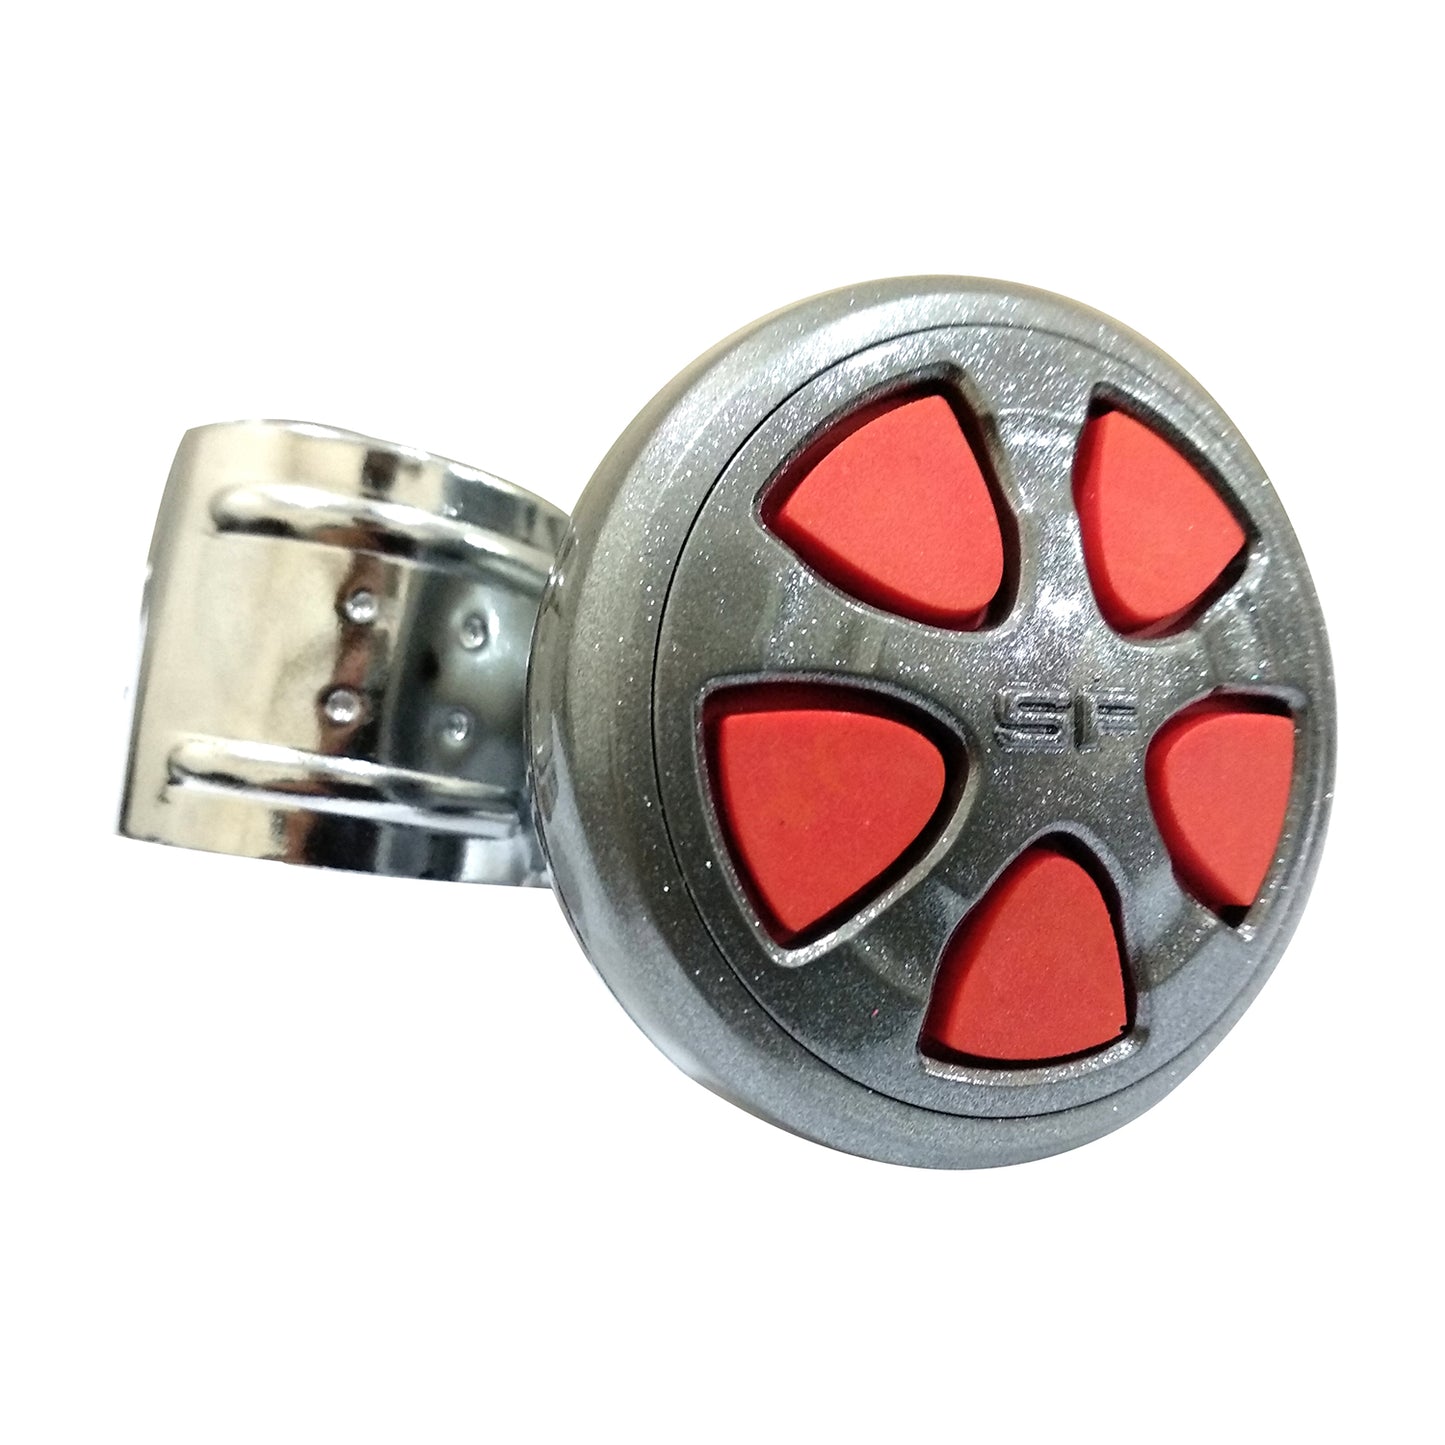 Oshotto Power Handle (SK-014) Car Steering Wheel Knob For All Cars (Red)